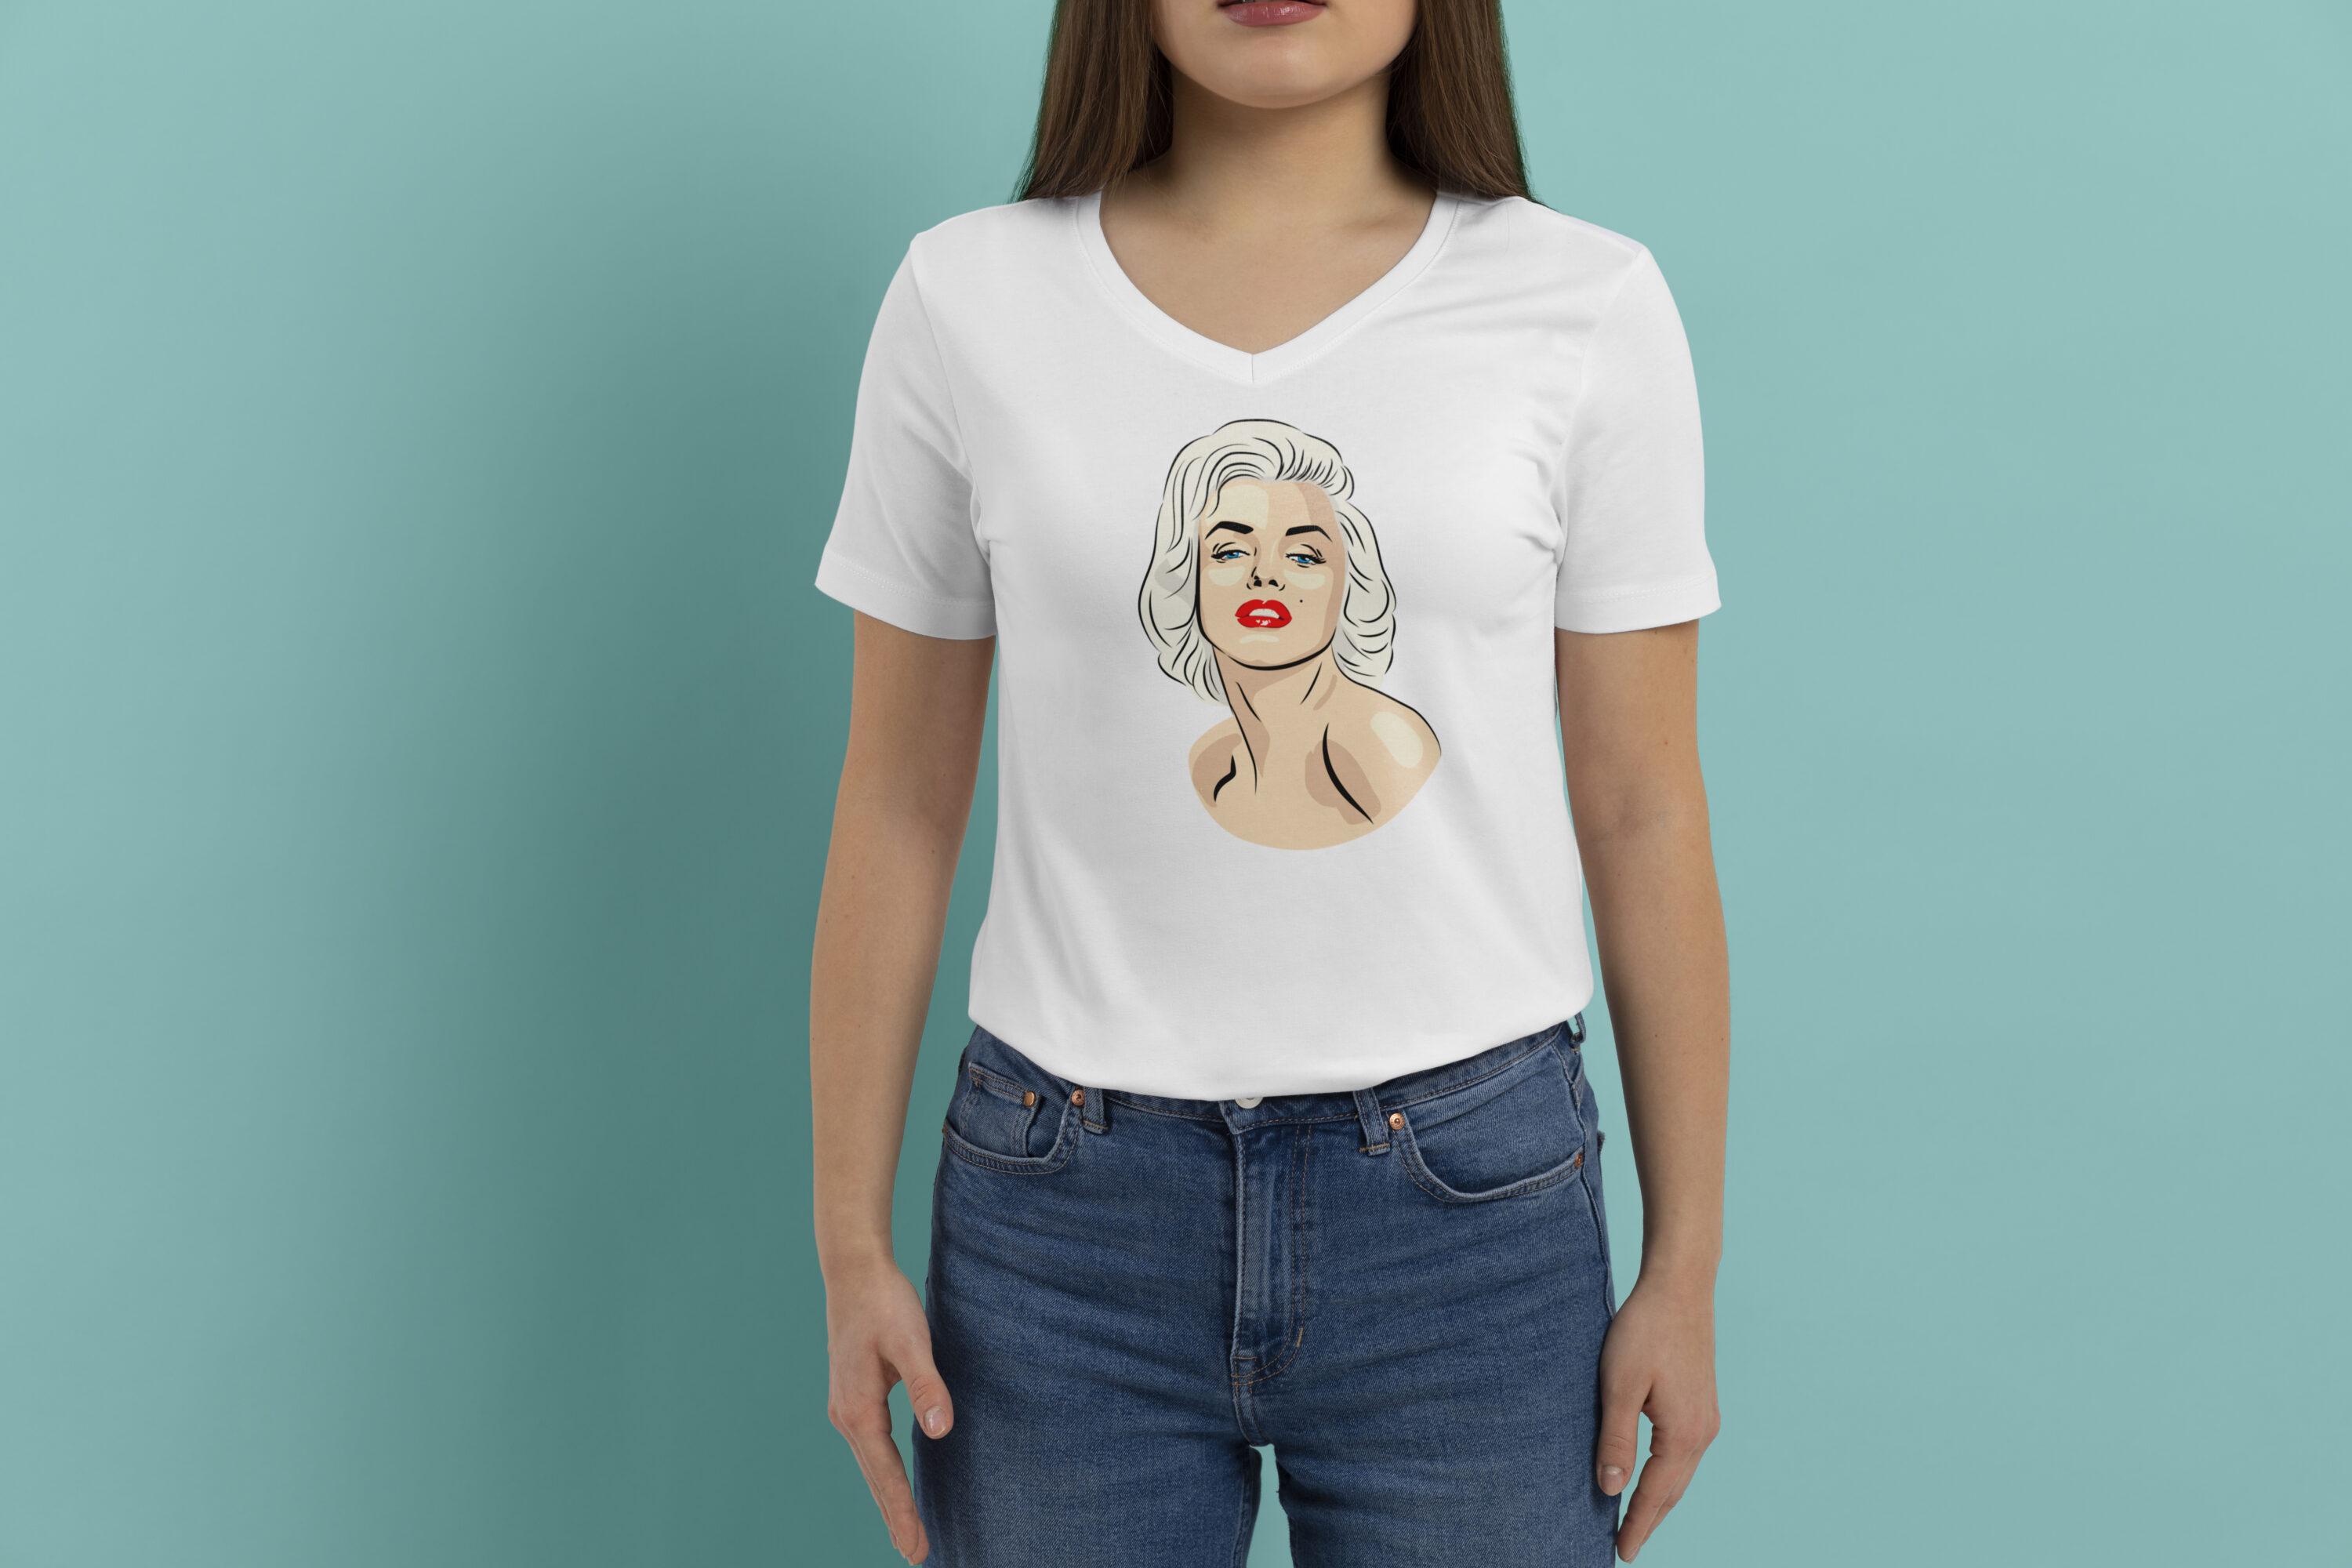 Image of a white T-shirt with an irresistible Marilyn Monroe print.